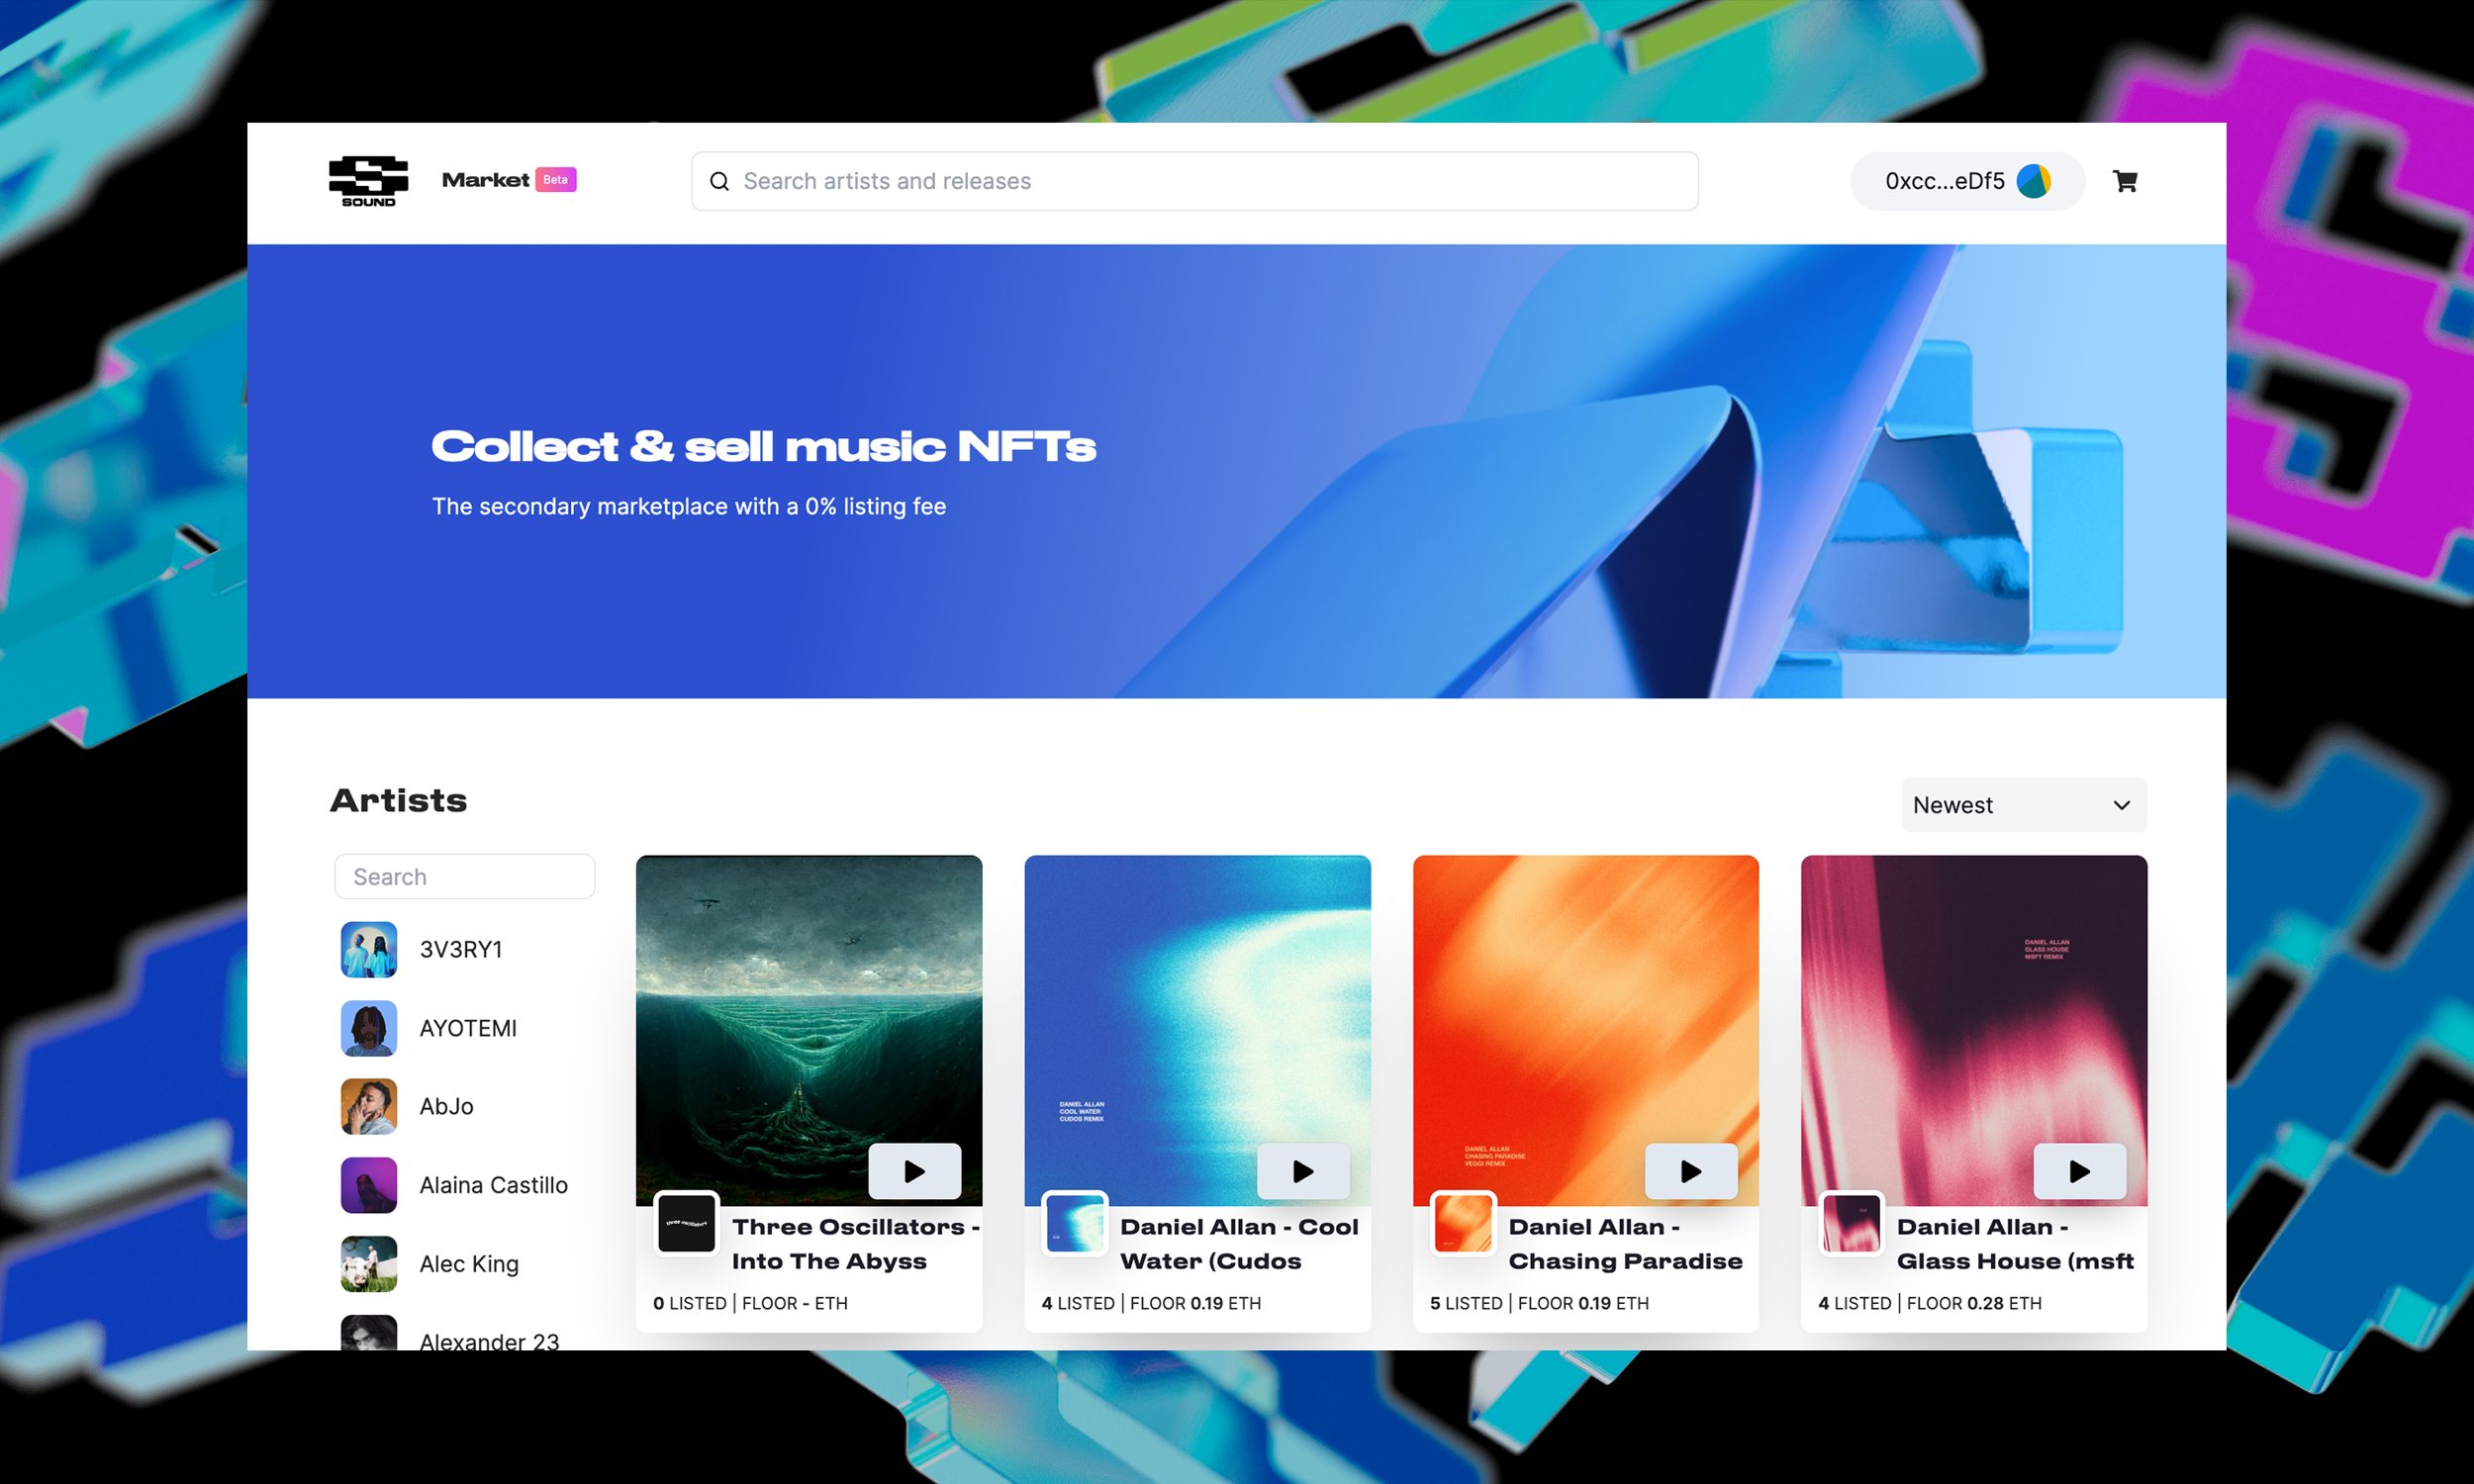 Browse all releases on the Sound Market